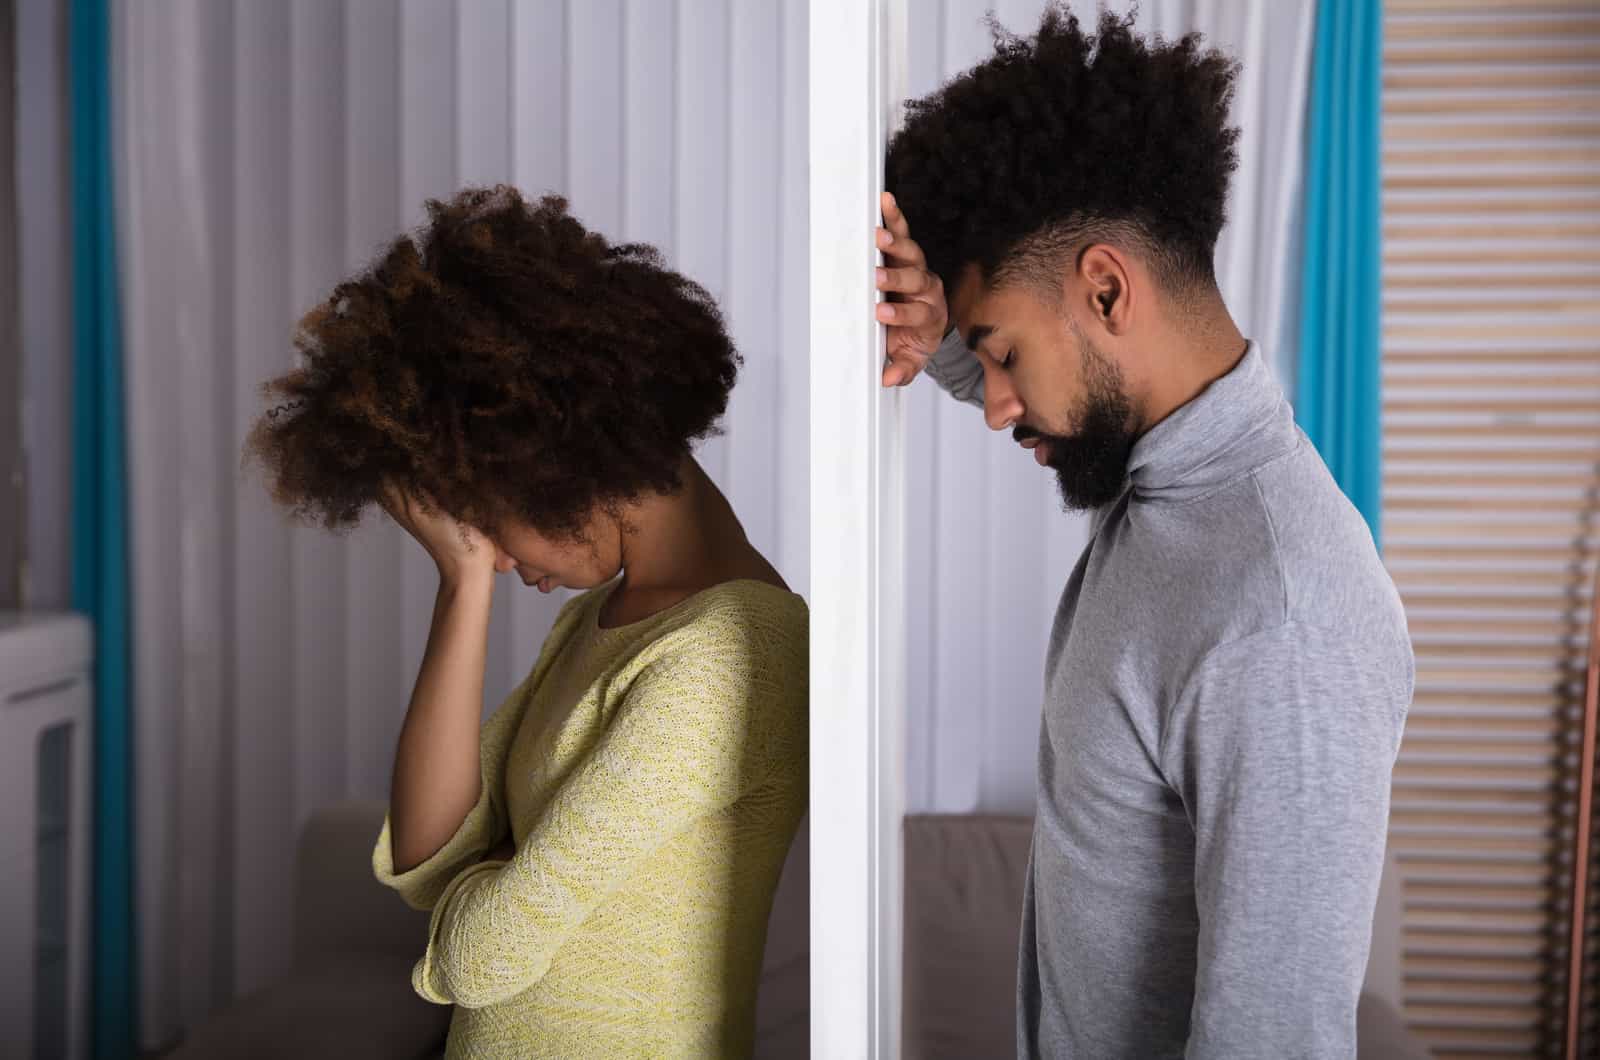 15 Signs You And Your Ex Are Meant To Be: Are They The One?